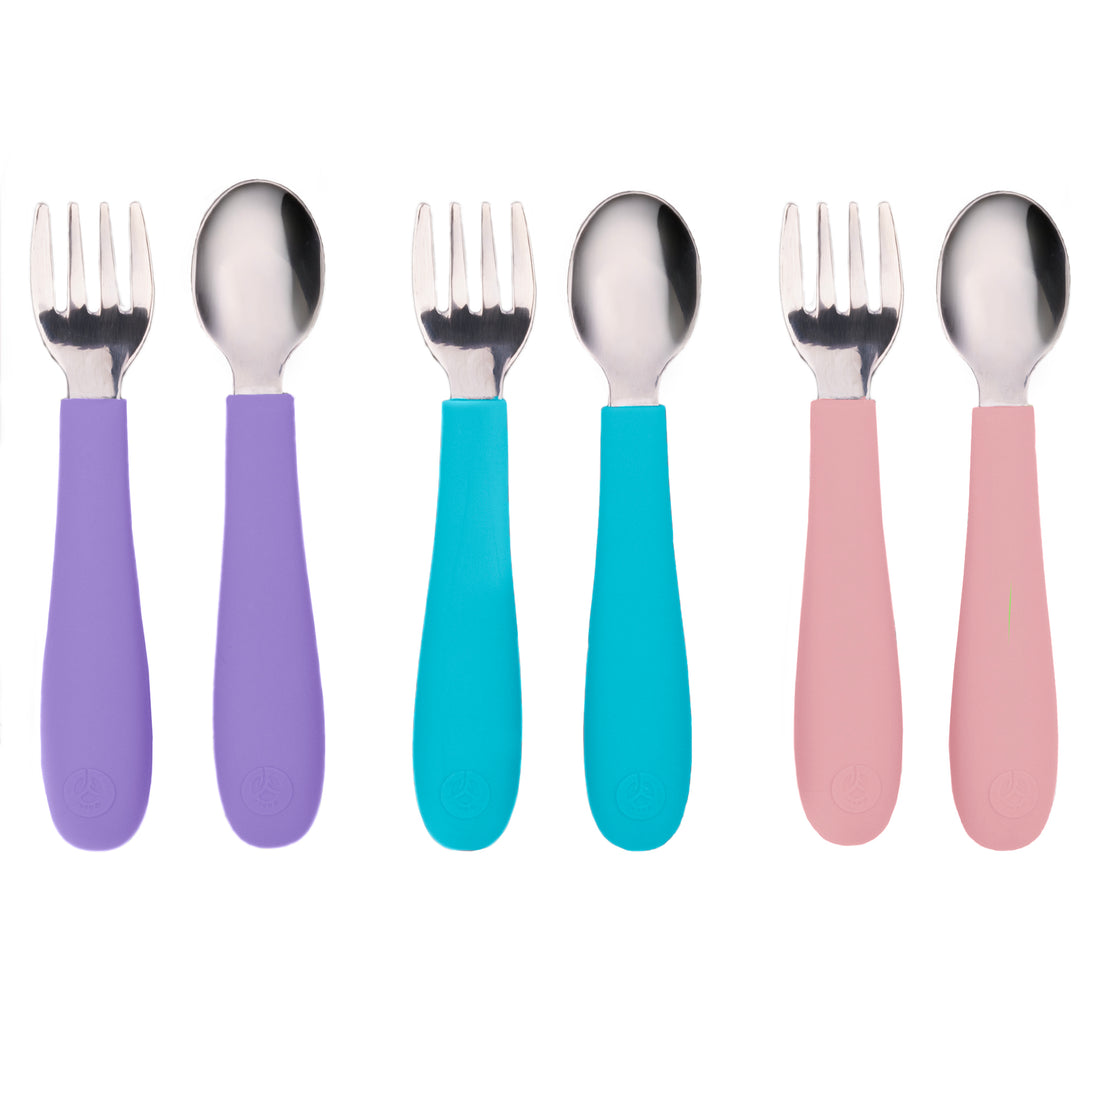 Toddler Forks And Toddler Spoon Silverware Set